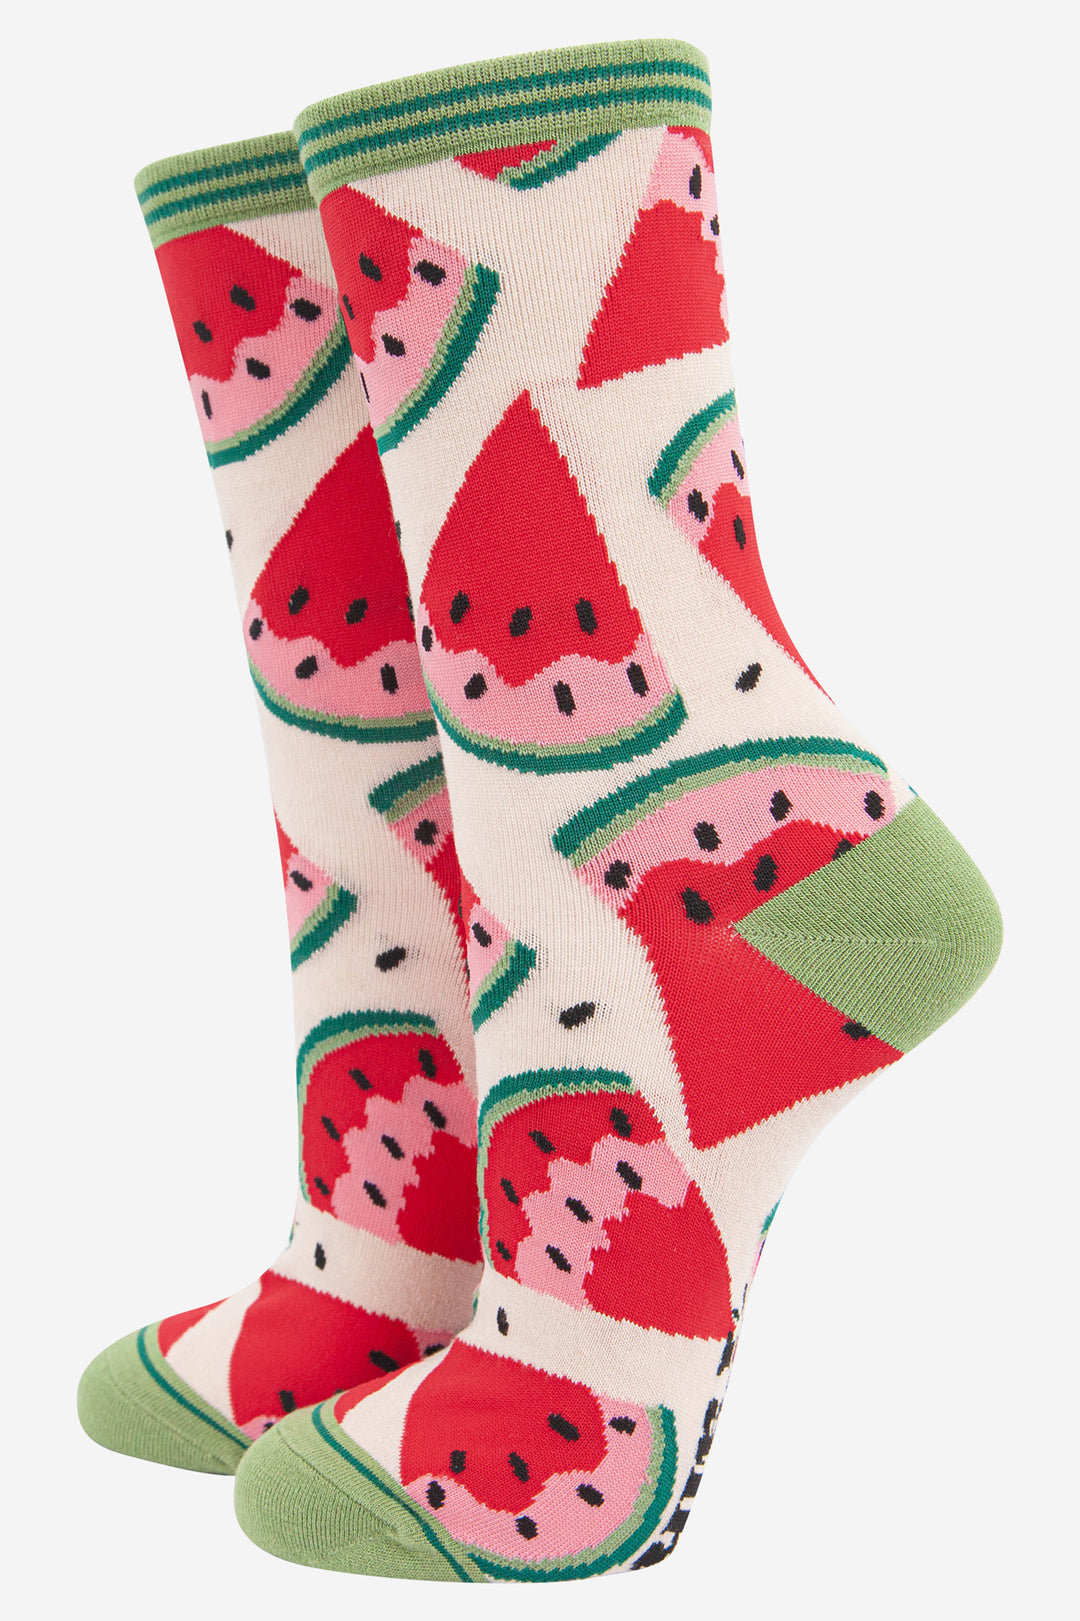 cream and green bamboo socks with an all over pattern of red watermelon slices